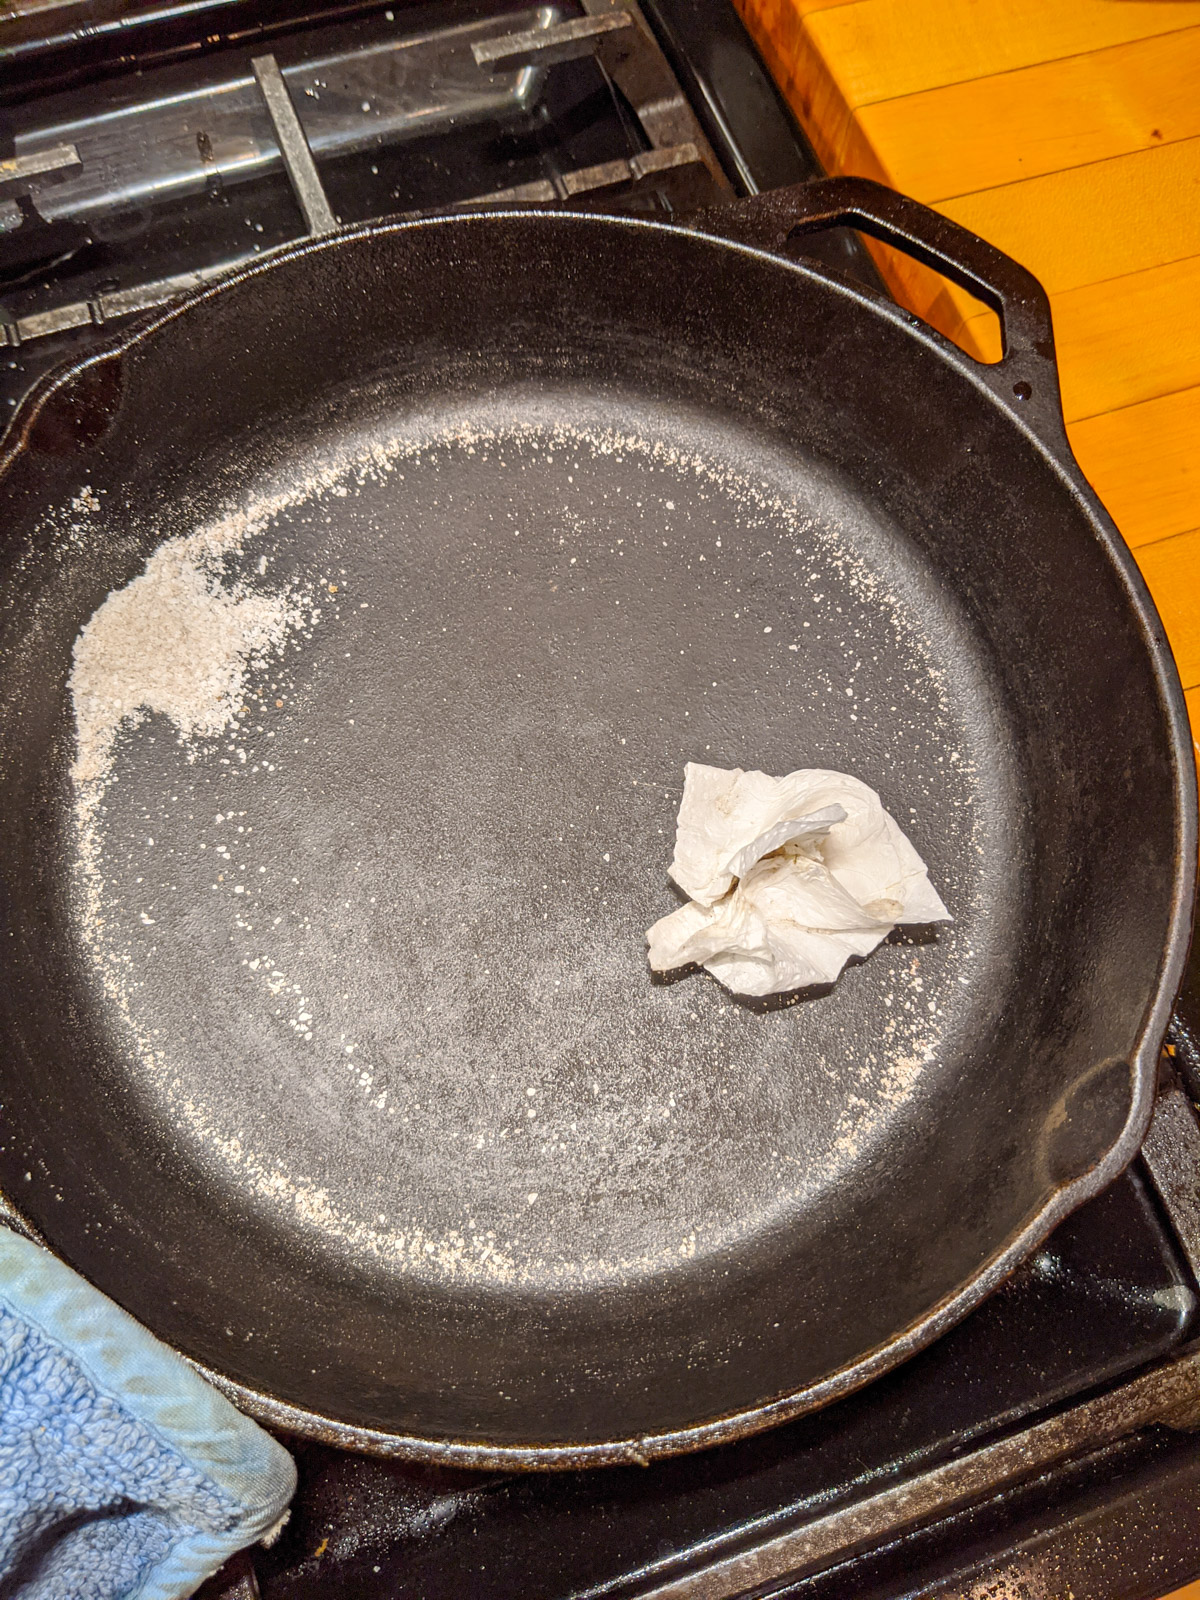 Cleaning a cast iron skillet with coarse salt and paper towel.